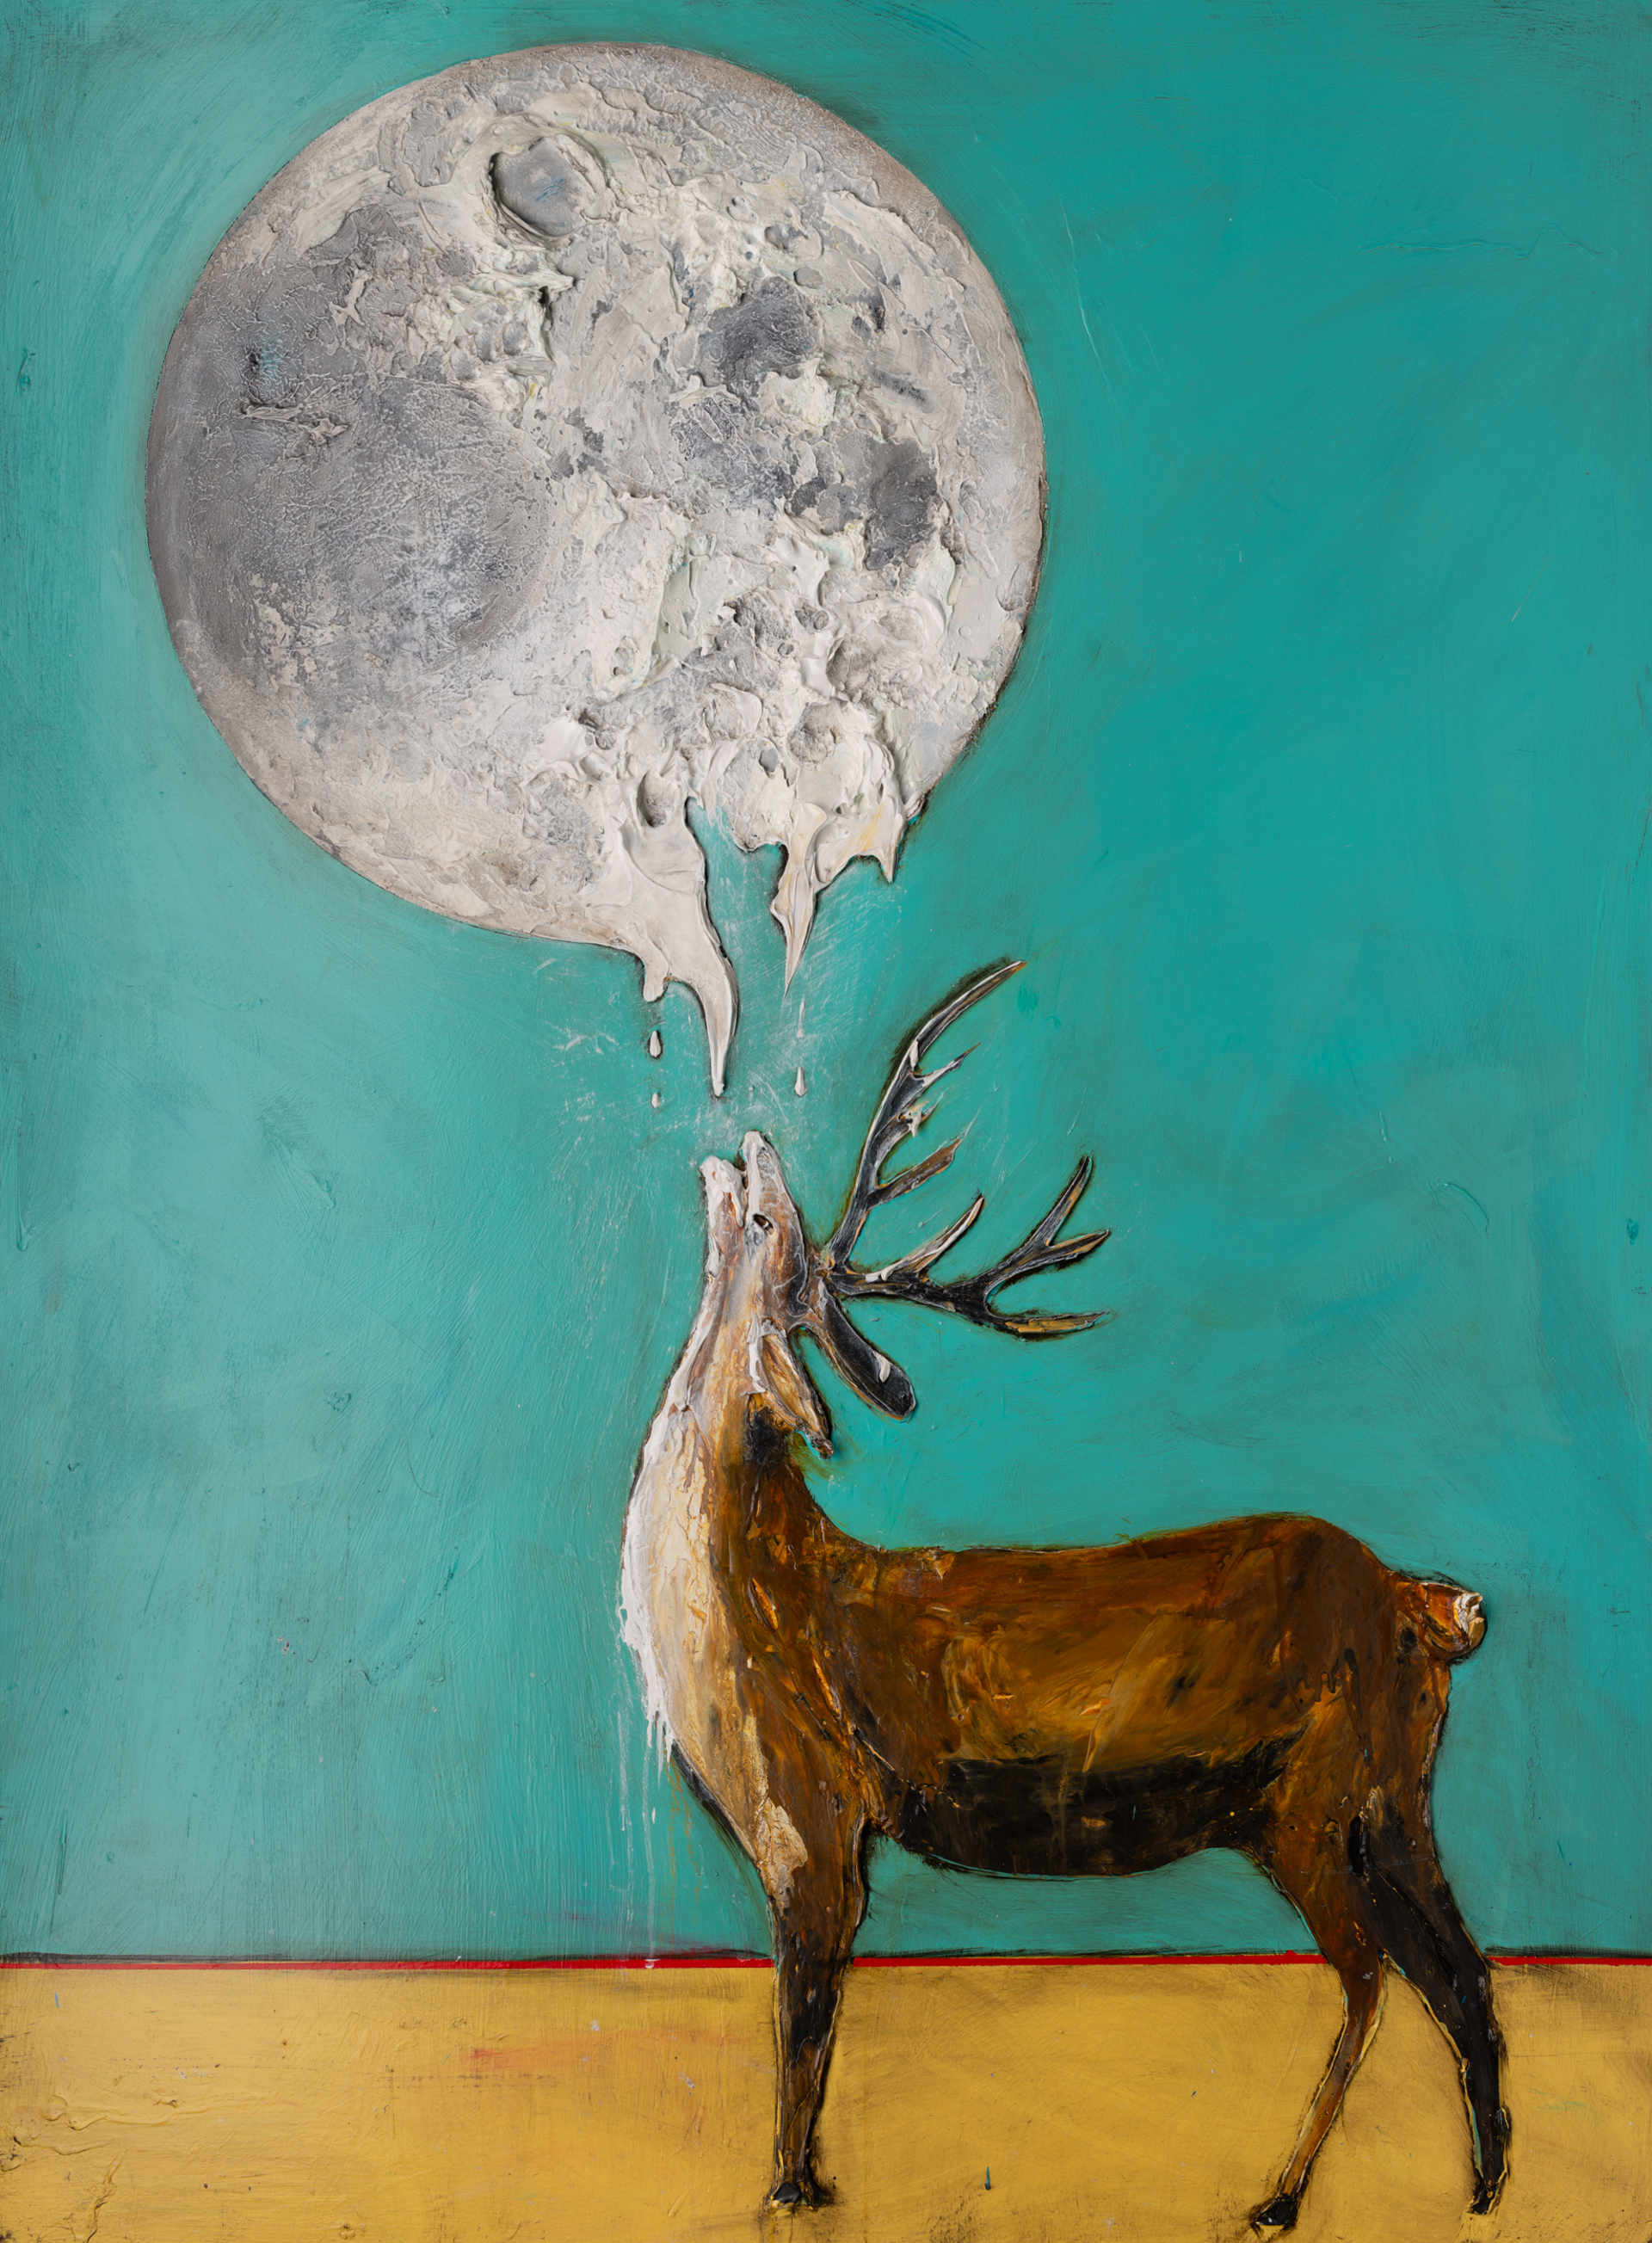 DEER AND MOON MS-44.5x59.5-2019-313 by JUSTIN GAFFREY